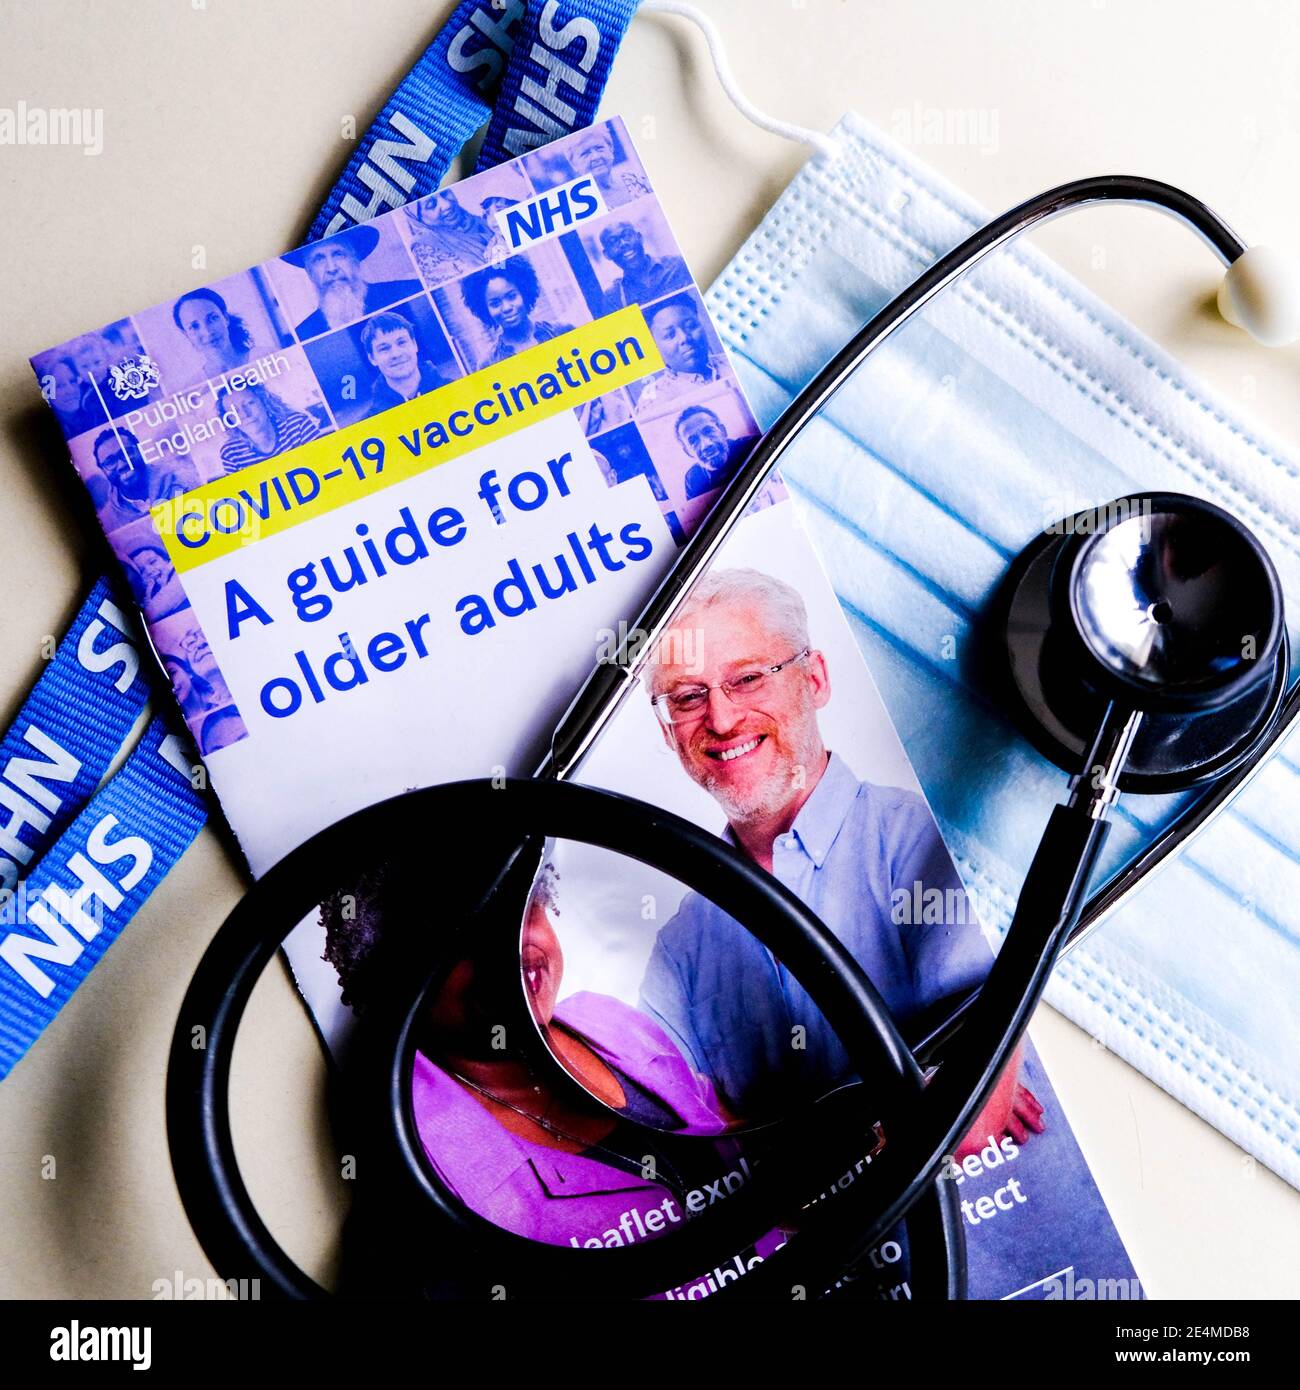 London UK, January 24 2021, COVID-19 Vaccination NHS Patient Guide For Older Adults Stock Photo